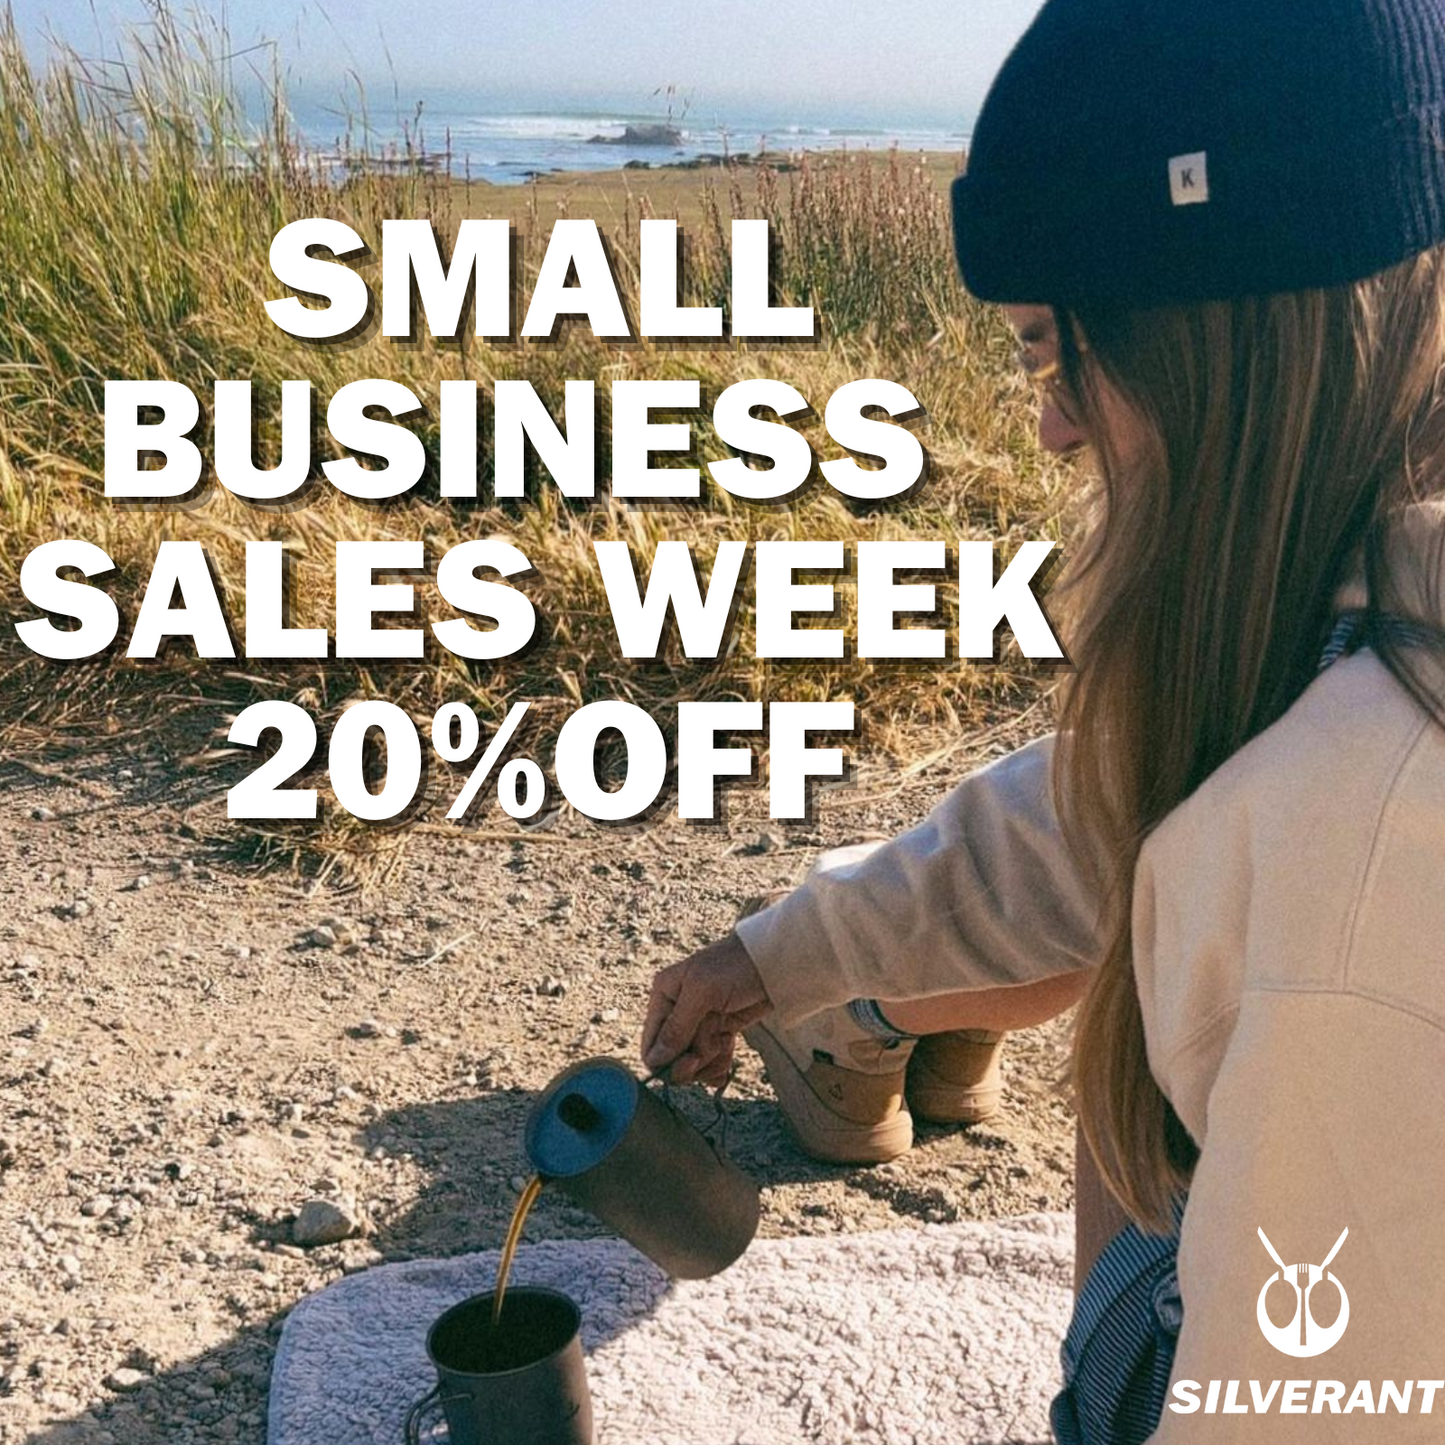 Small Business Sales Week SilverAnt Main Image Promotion - Credit @who_maddy_actually